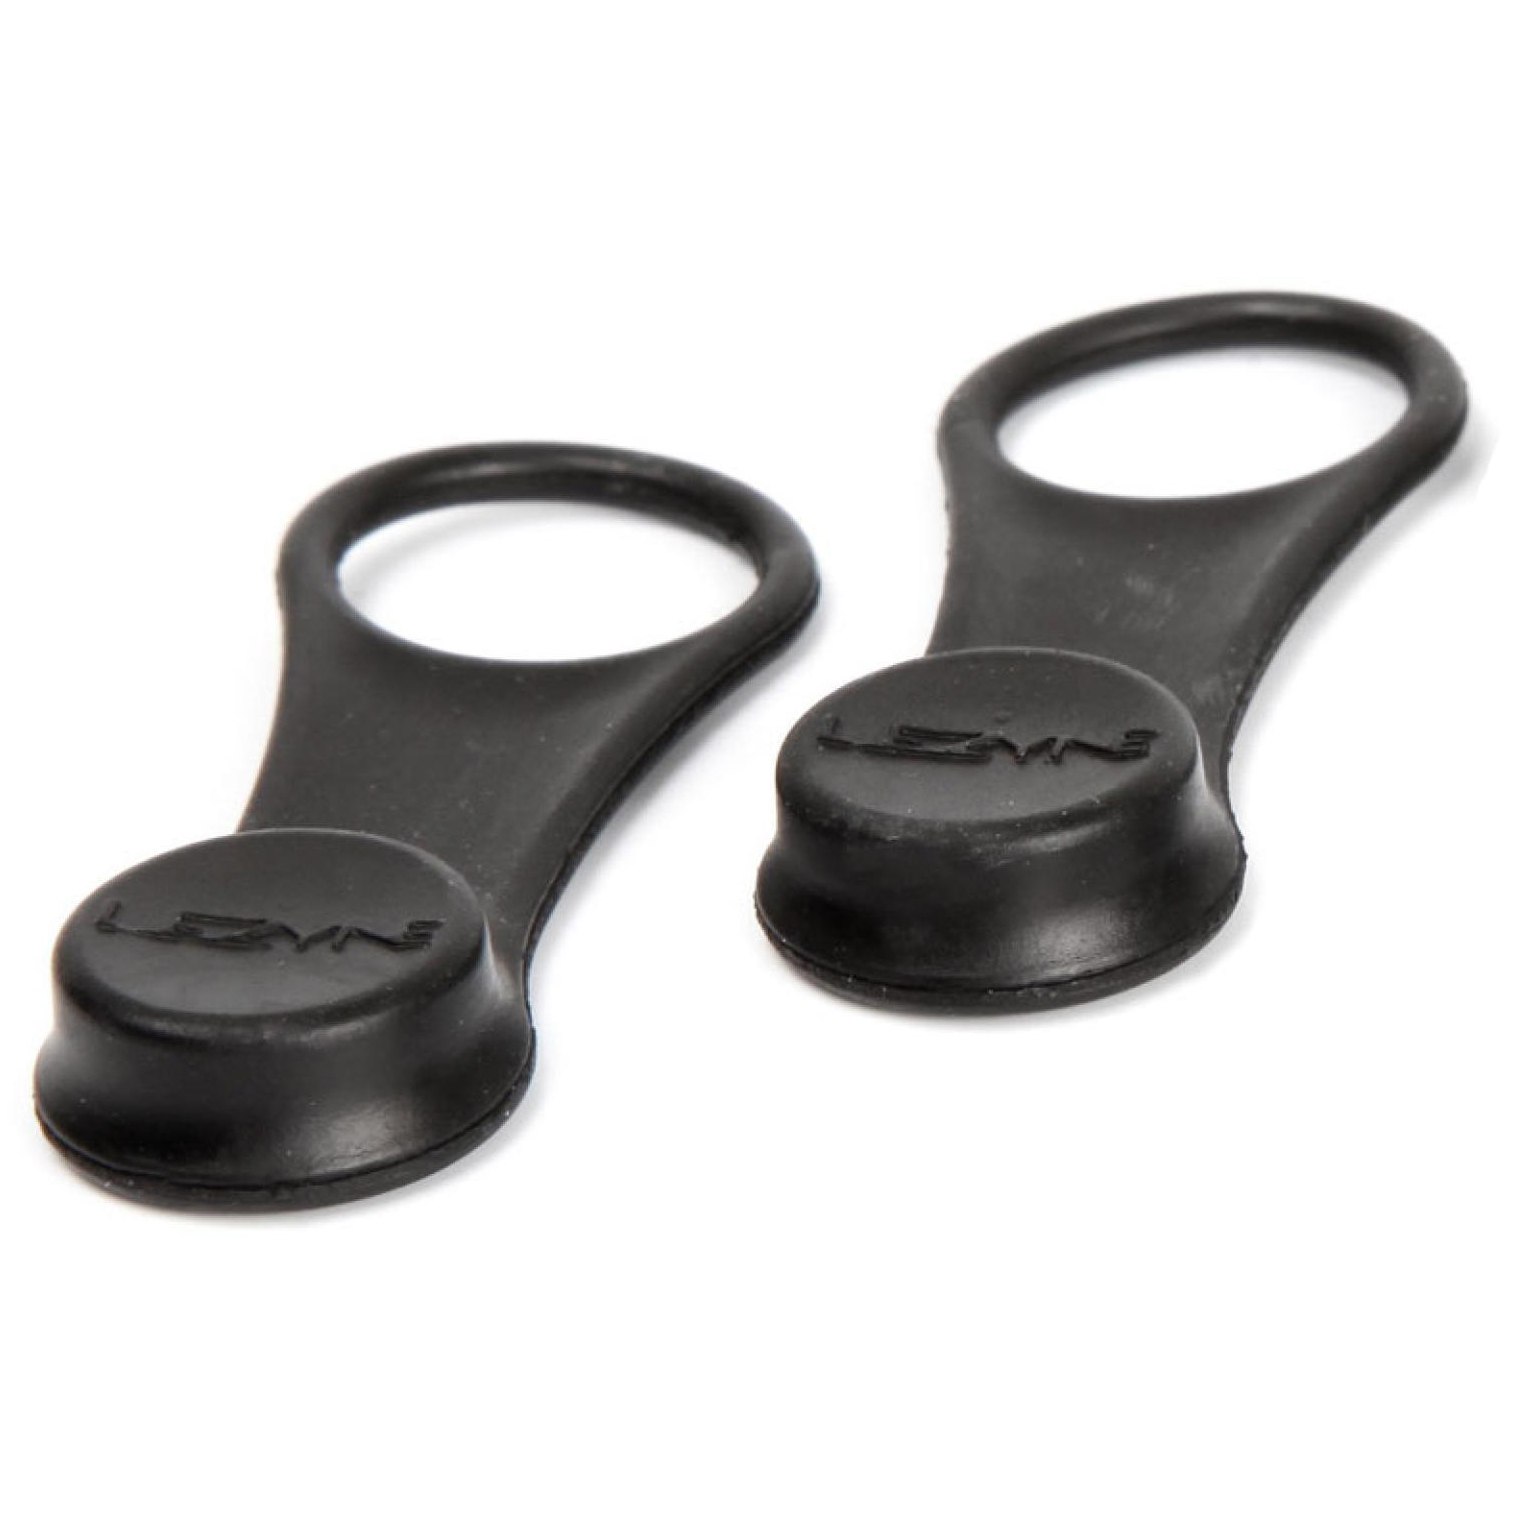 Picture of Lezyne Replacement Rubber Caps for HP/HV/Alloy/Pressure/Road Drive